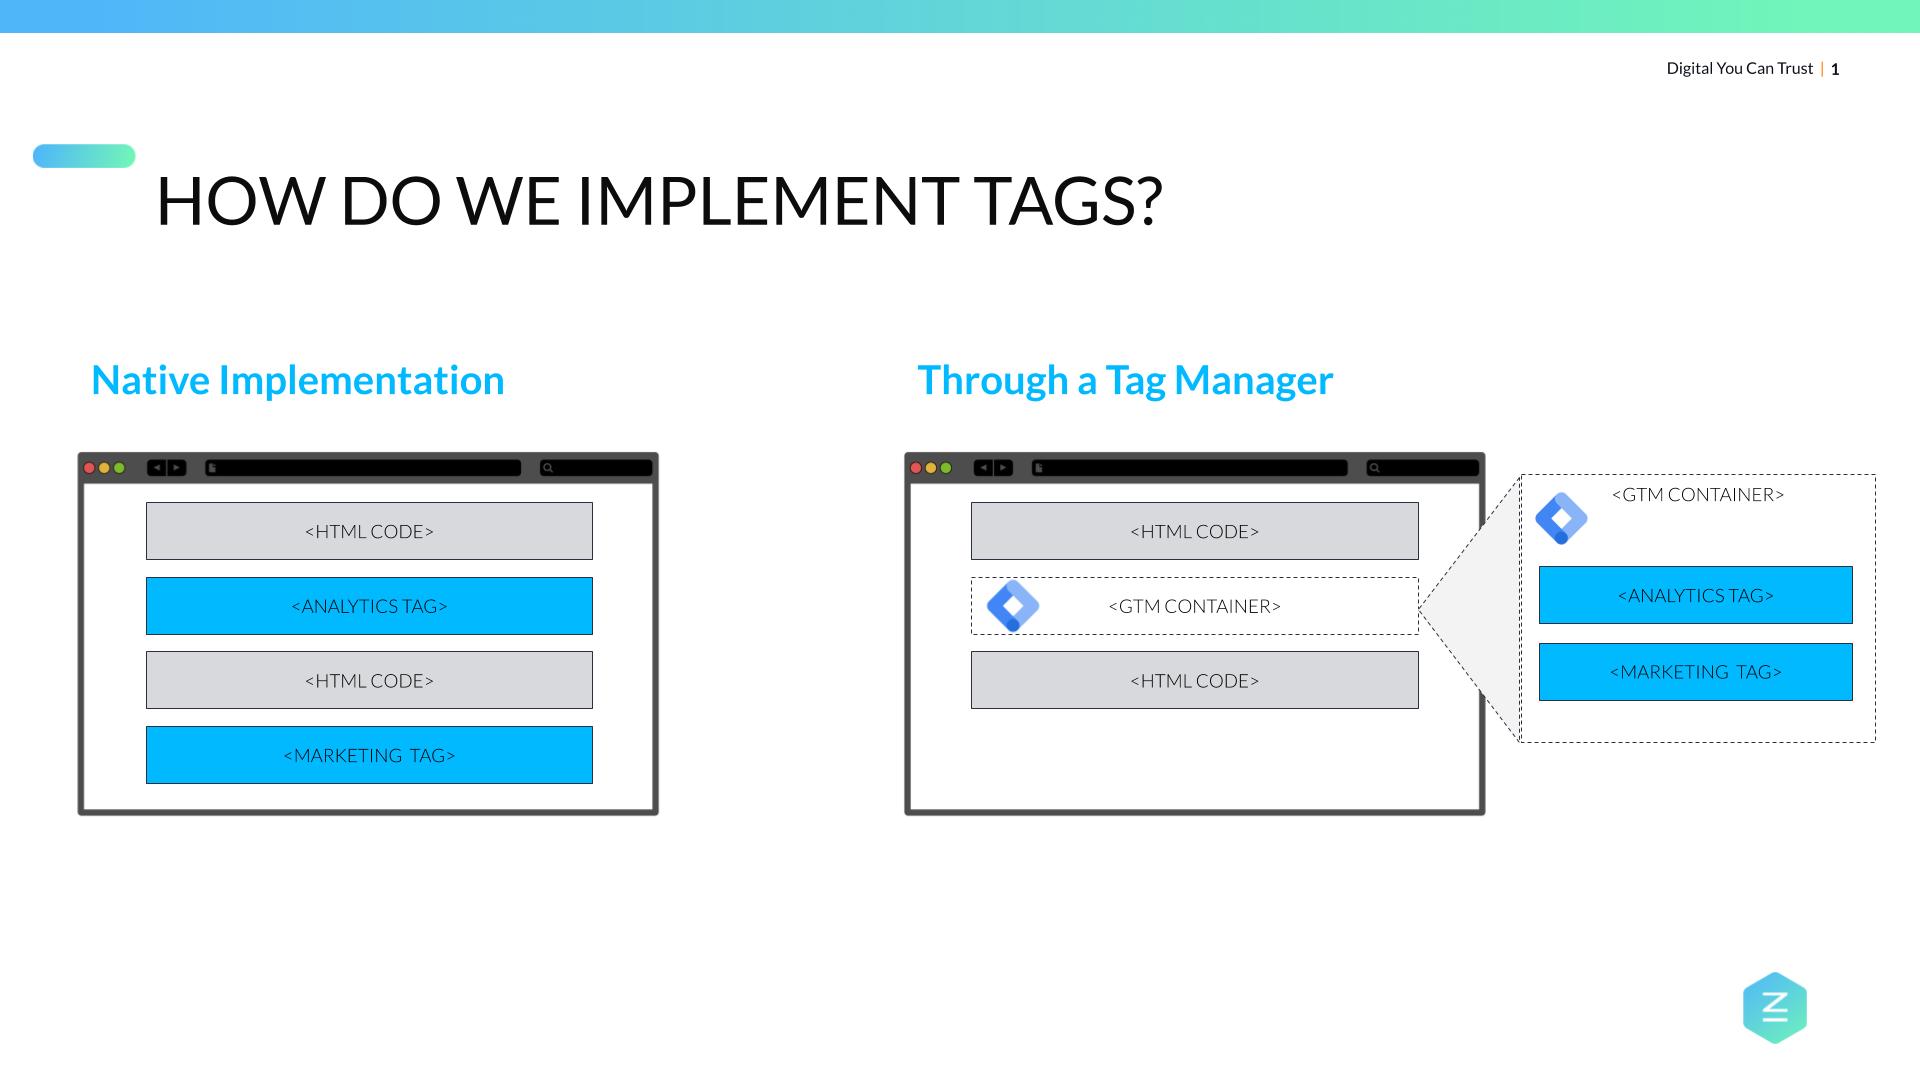 How to implement tags